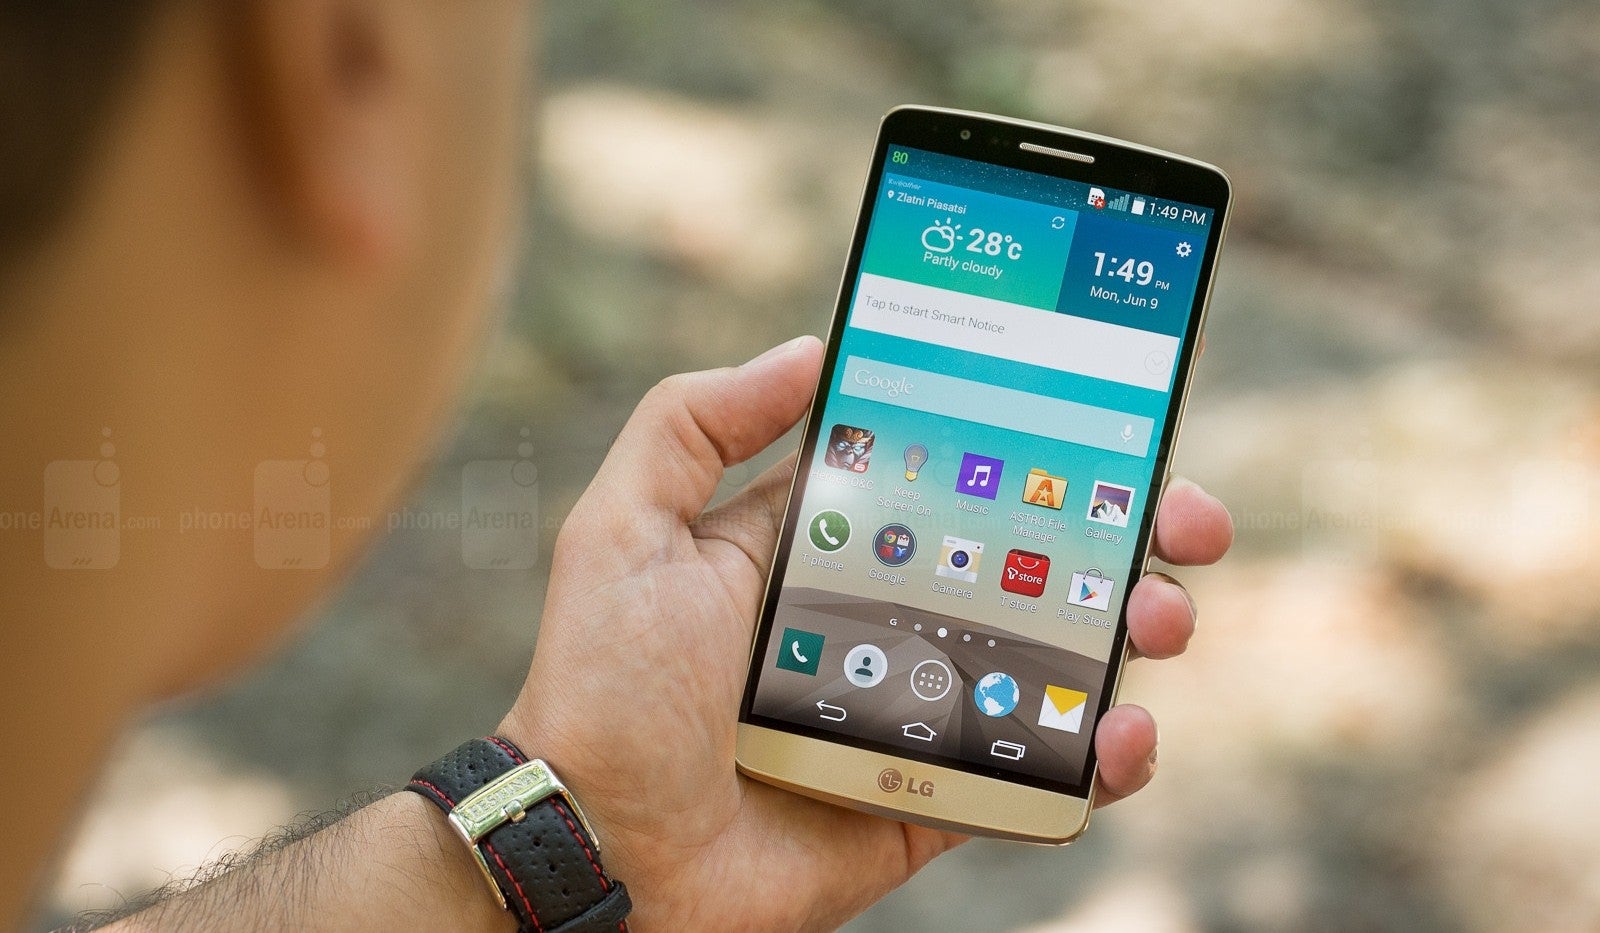 Twitter wars: LG says the G3 is the world's first Quad HD smartphone, Oppo disagrees